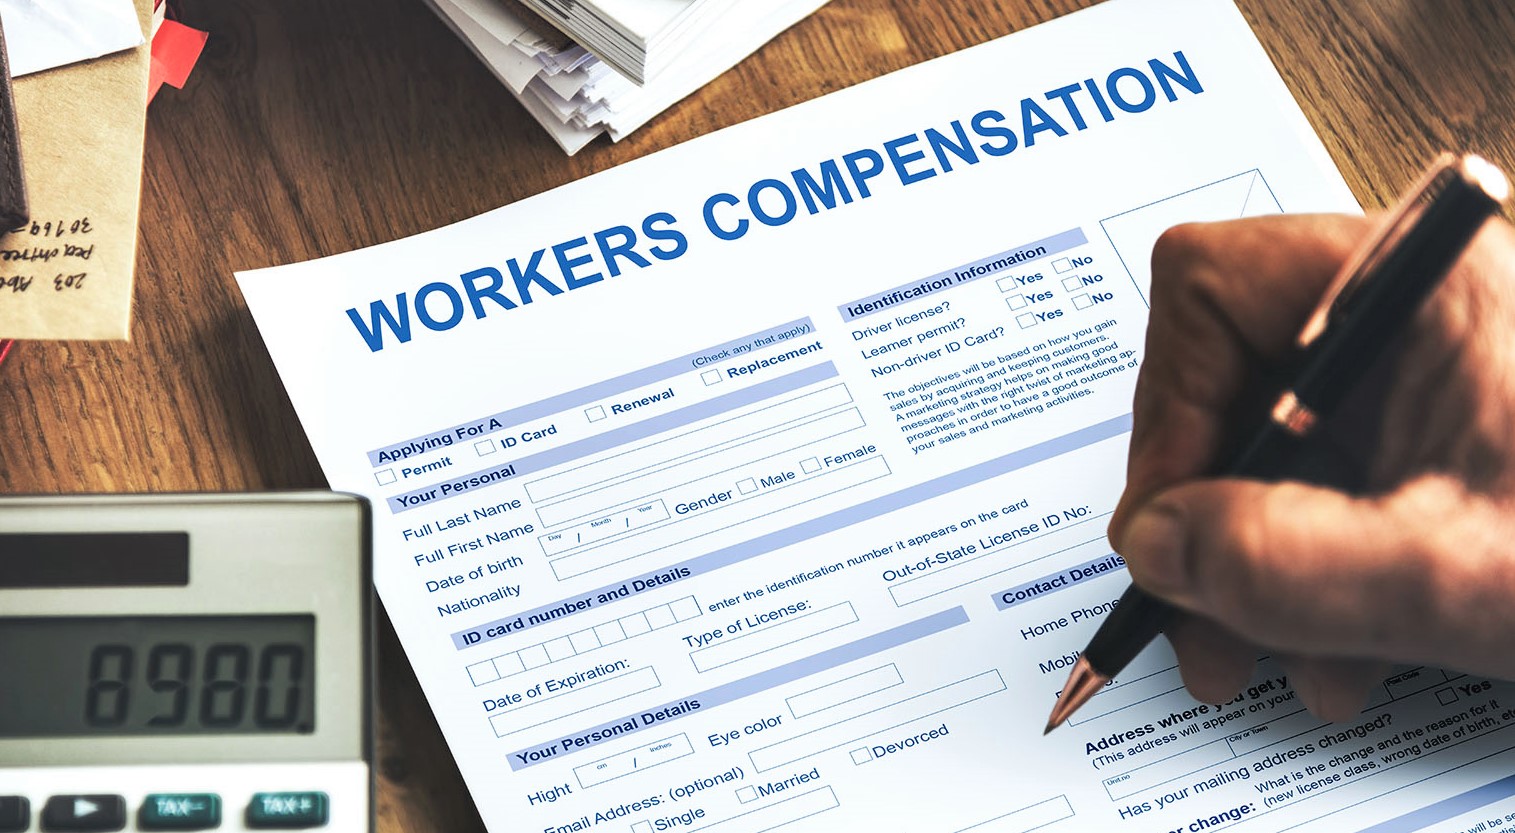 How to Reduce Workers Compensation Claims and Premiums